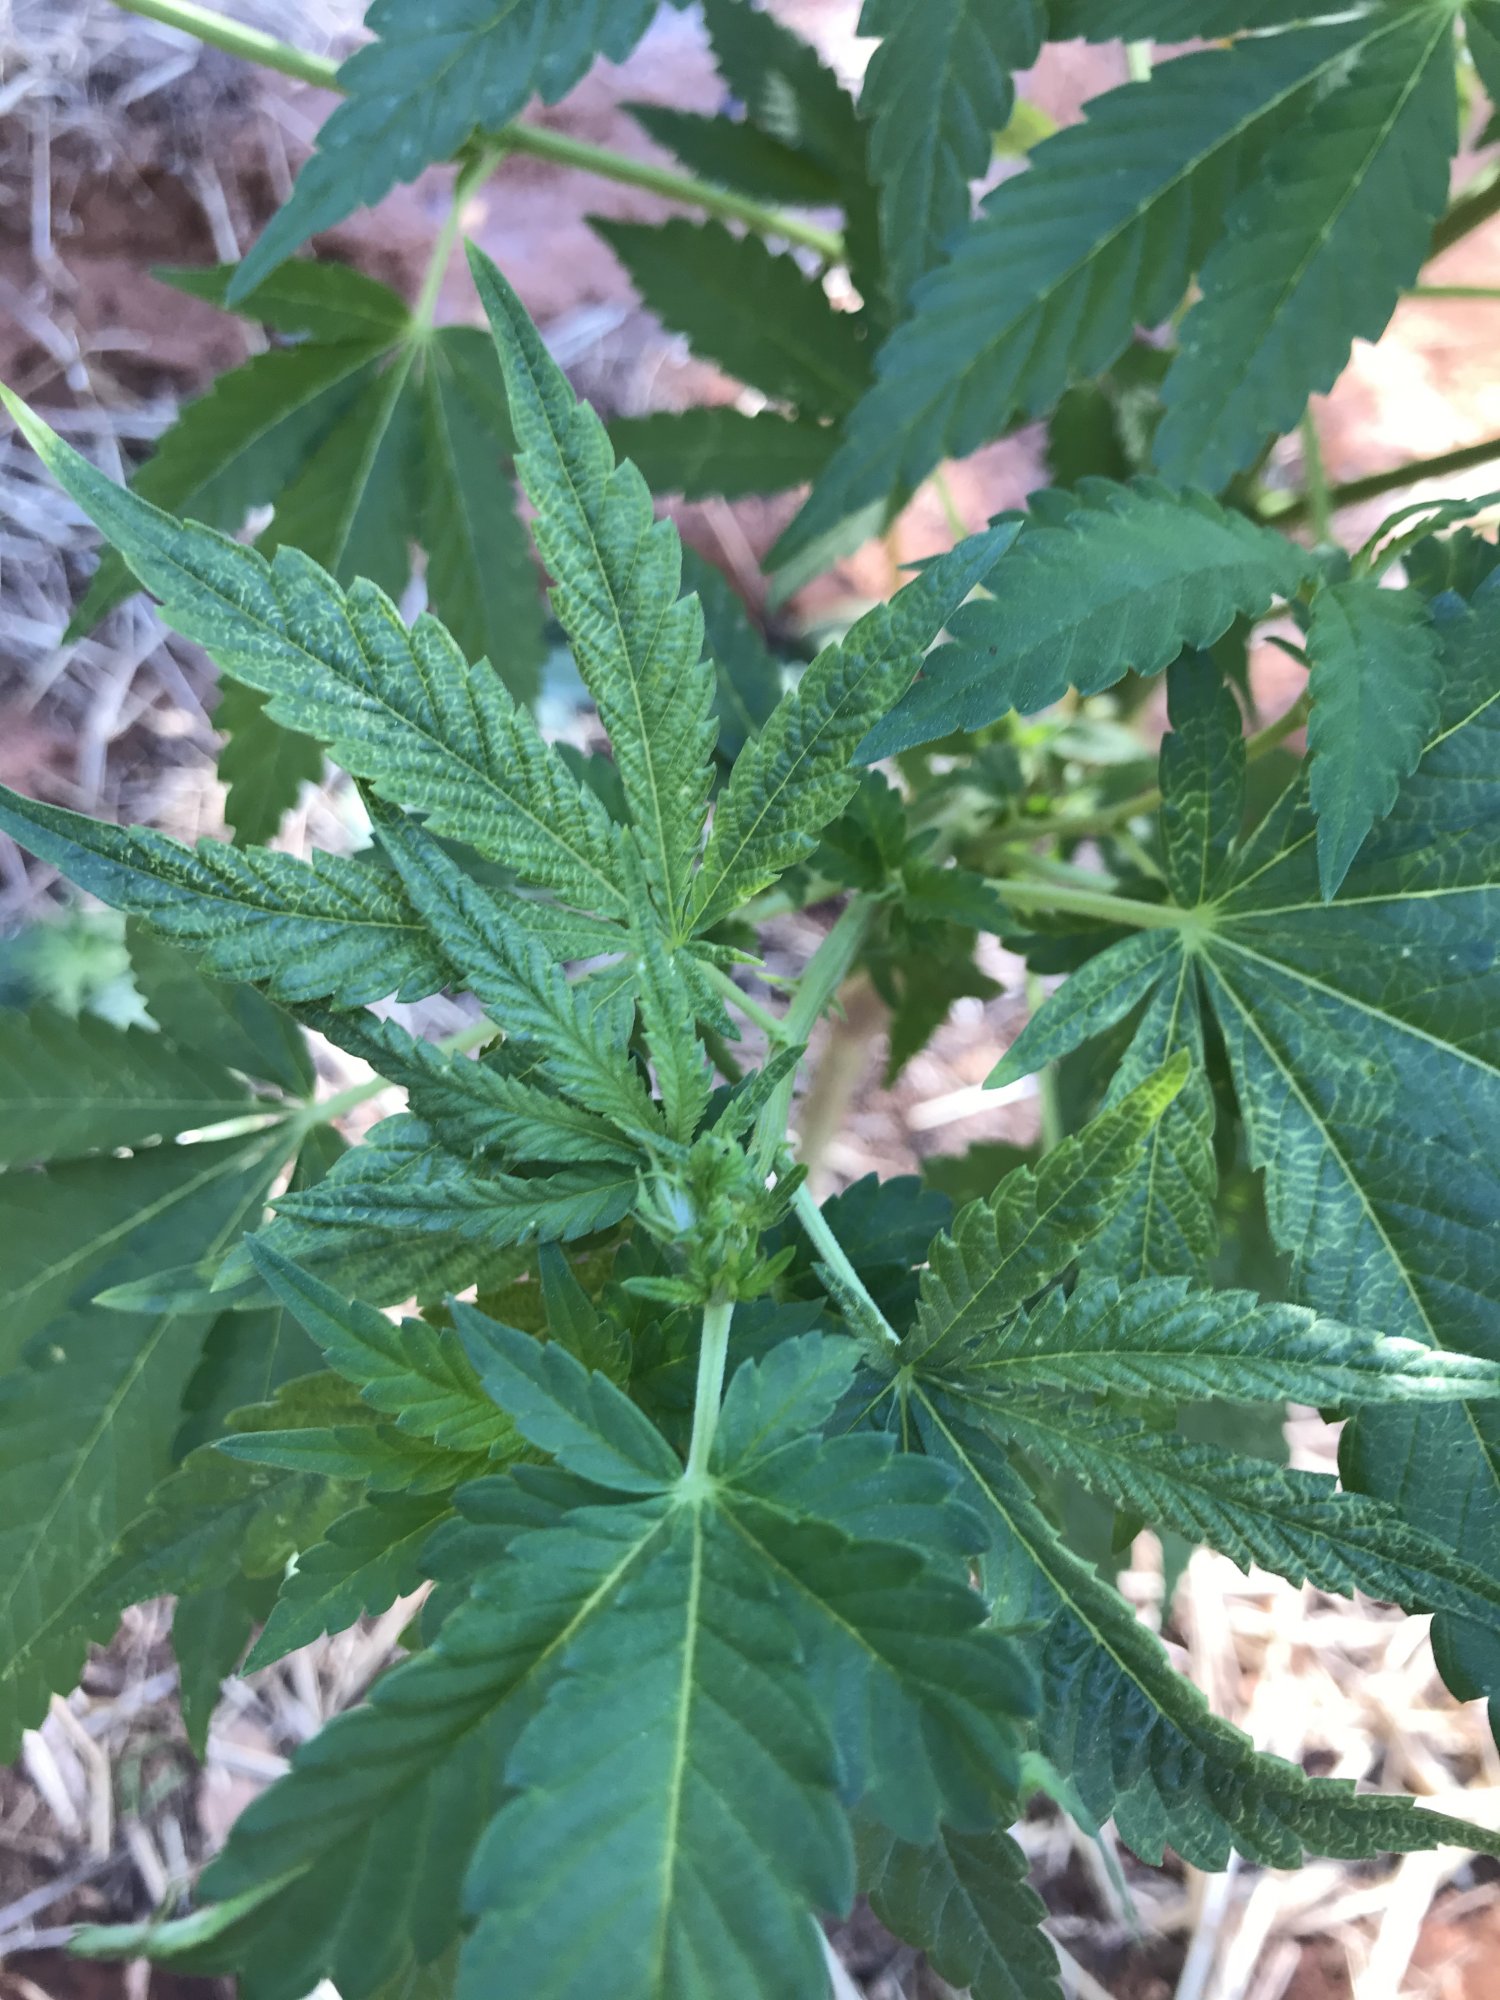 Yellow lines showing up on leaves